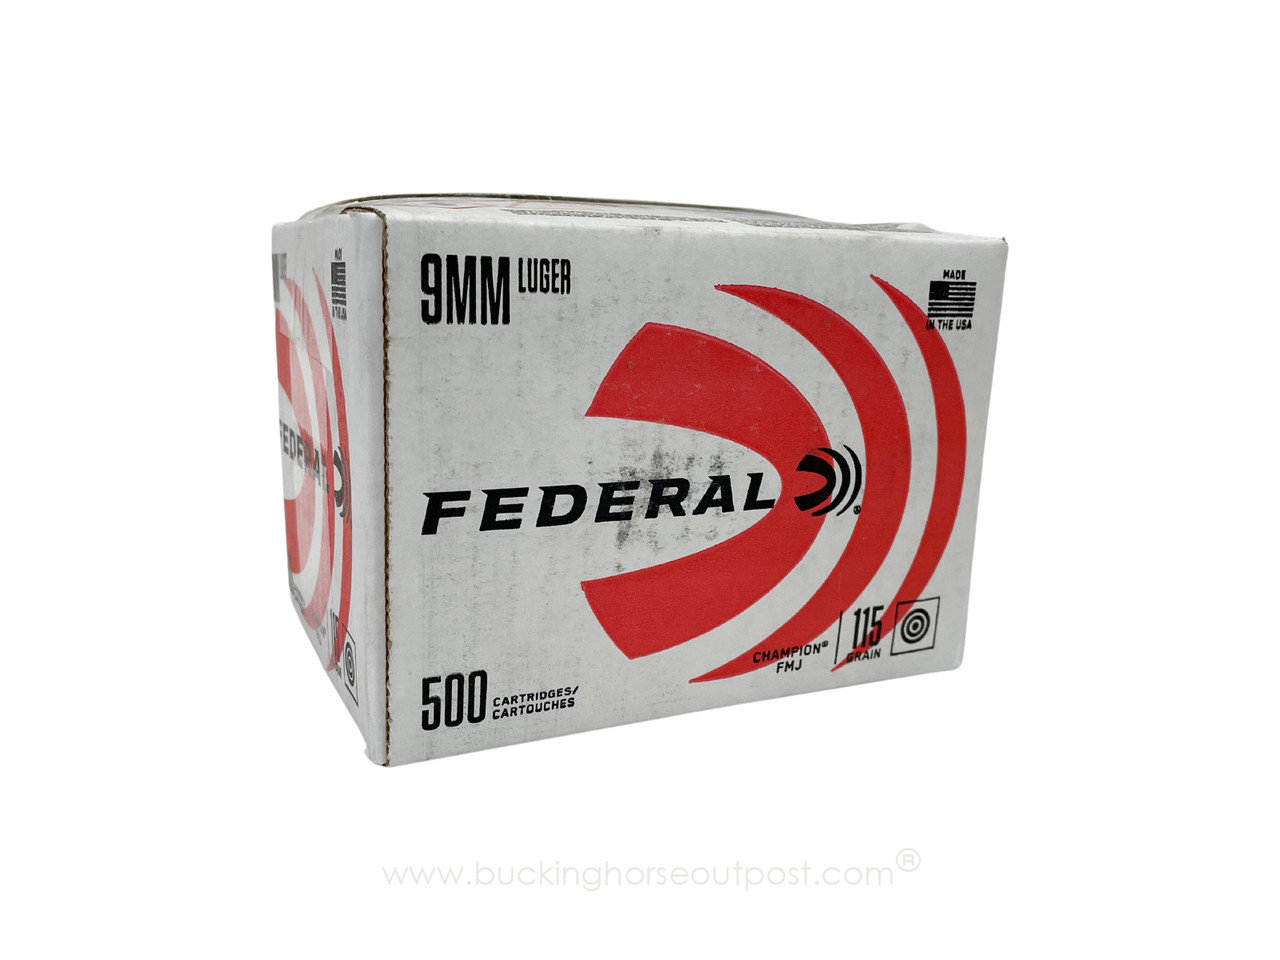 Federal Champion Training 9mm 115 Grain Full Metal Jacket 500rds LOOSE Per Case (C9115A500) Limit 10 cases - FREE SHIPPING on orders over $175